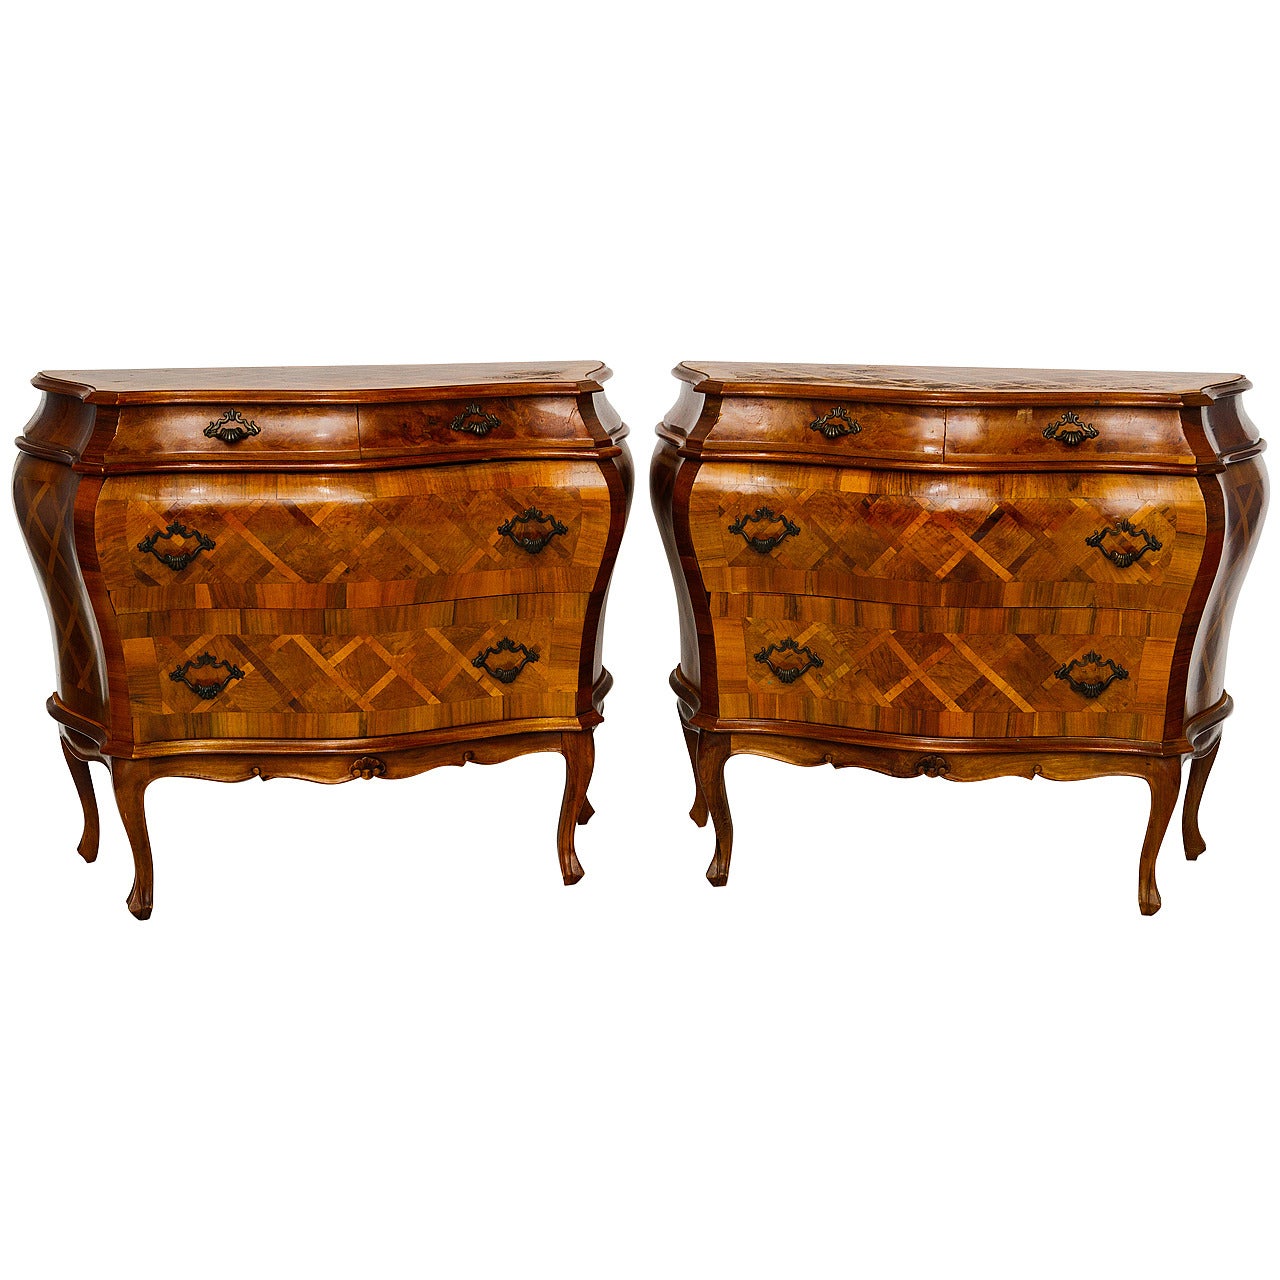 Pair of Italian Parquetry Bombay Chests